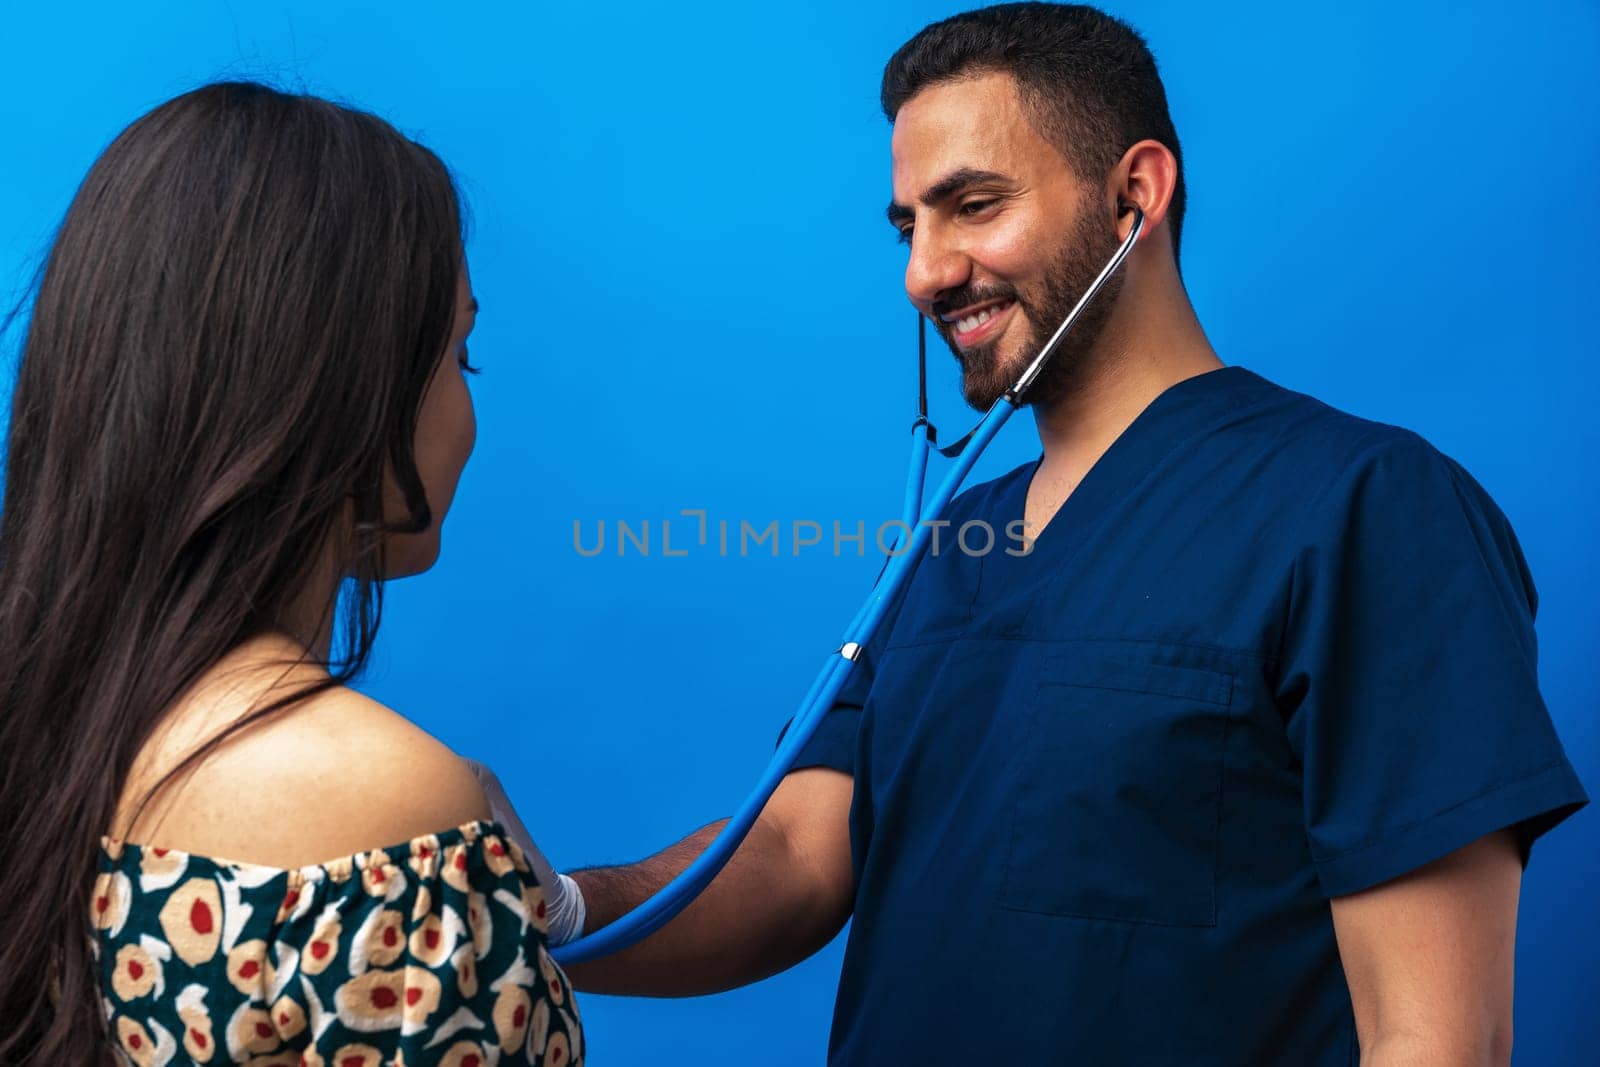 Arab doctor in a blue uniform standing with the stethoscope and listening to the heartbeat of a woman patient, close up